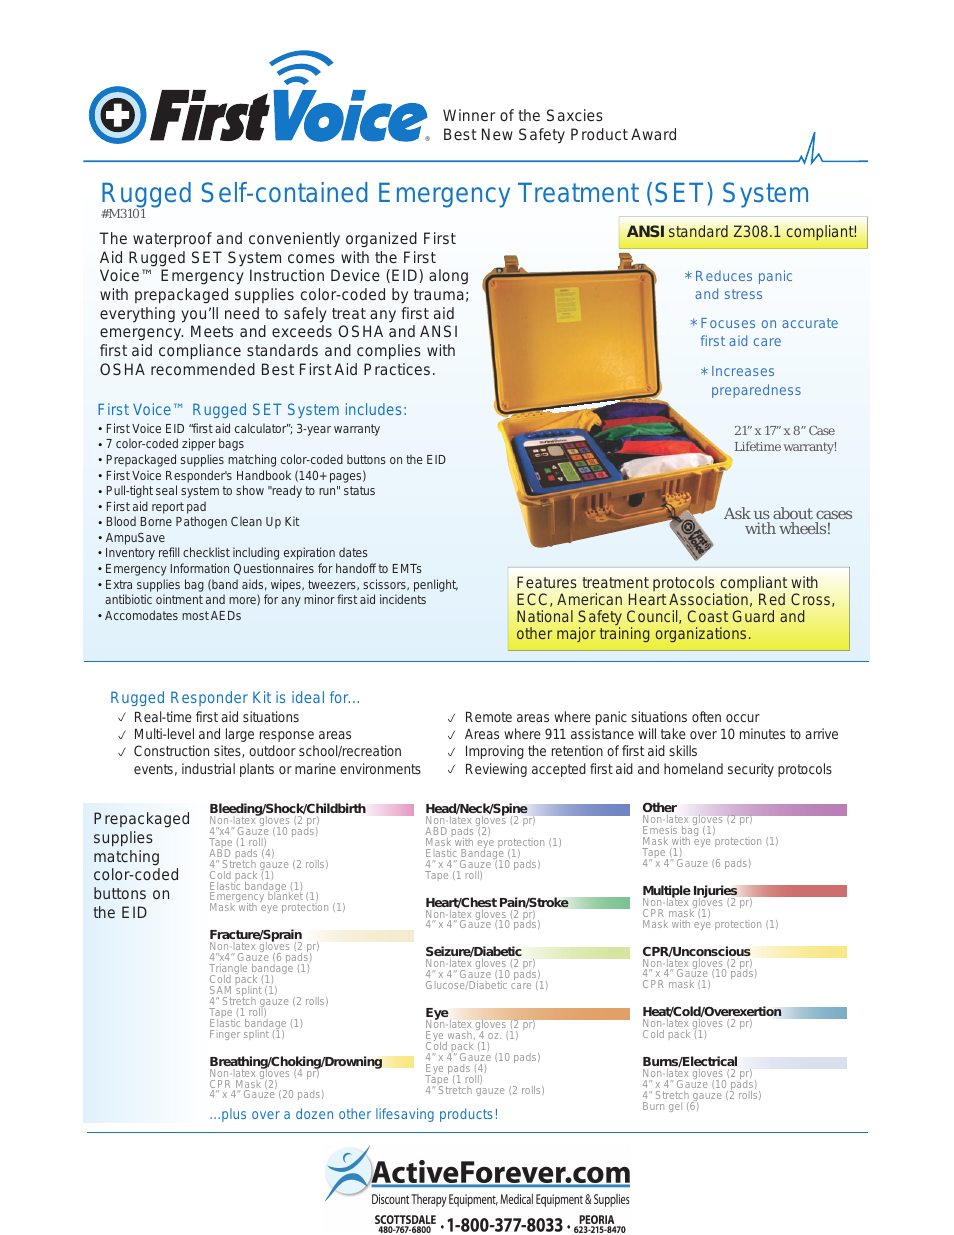 First Voice Rugged Self Contained Emergency Treatment System